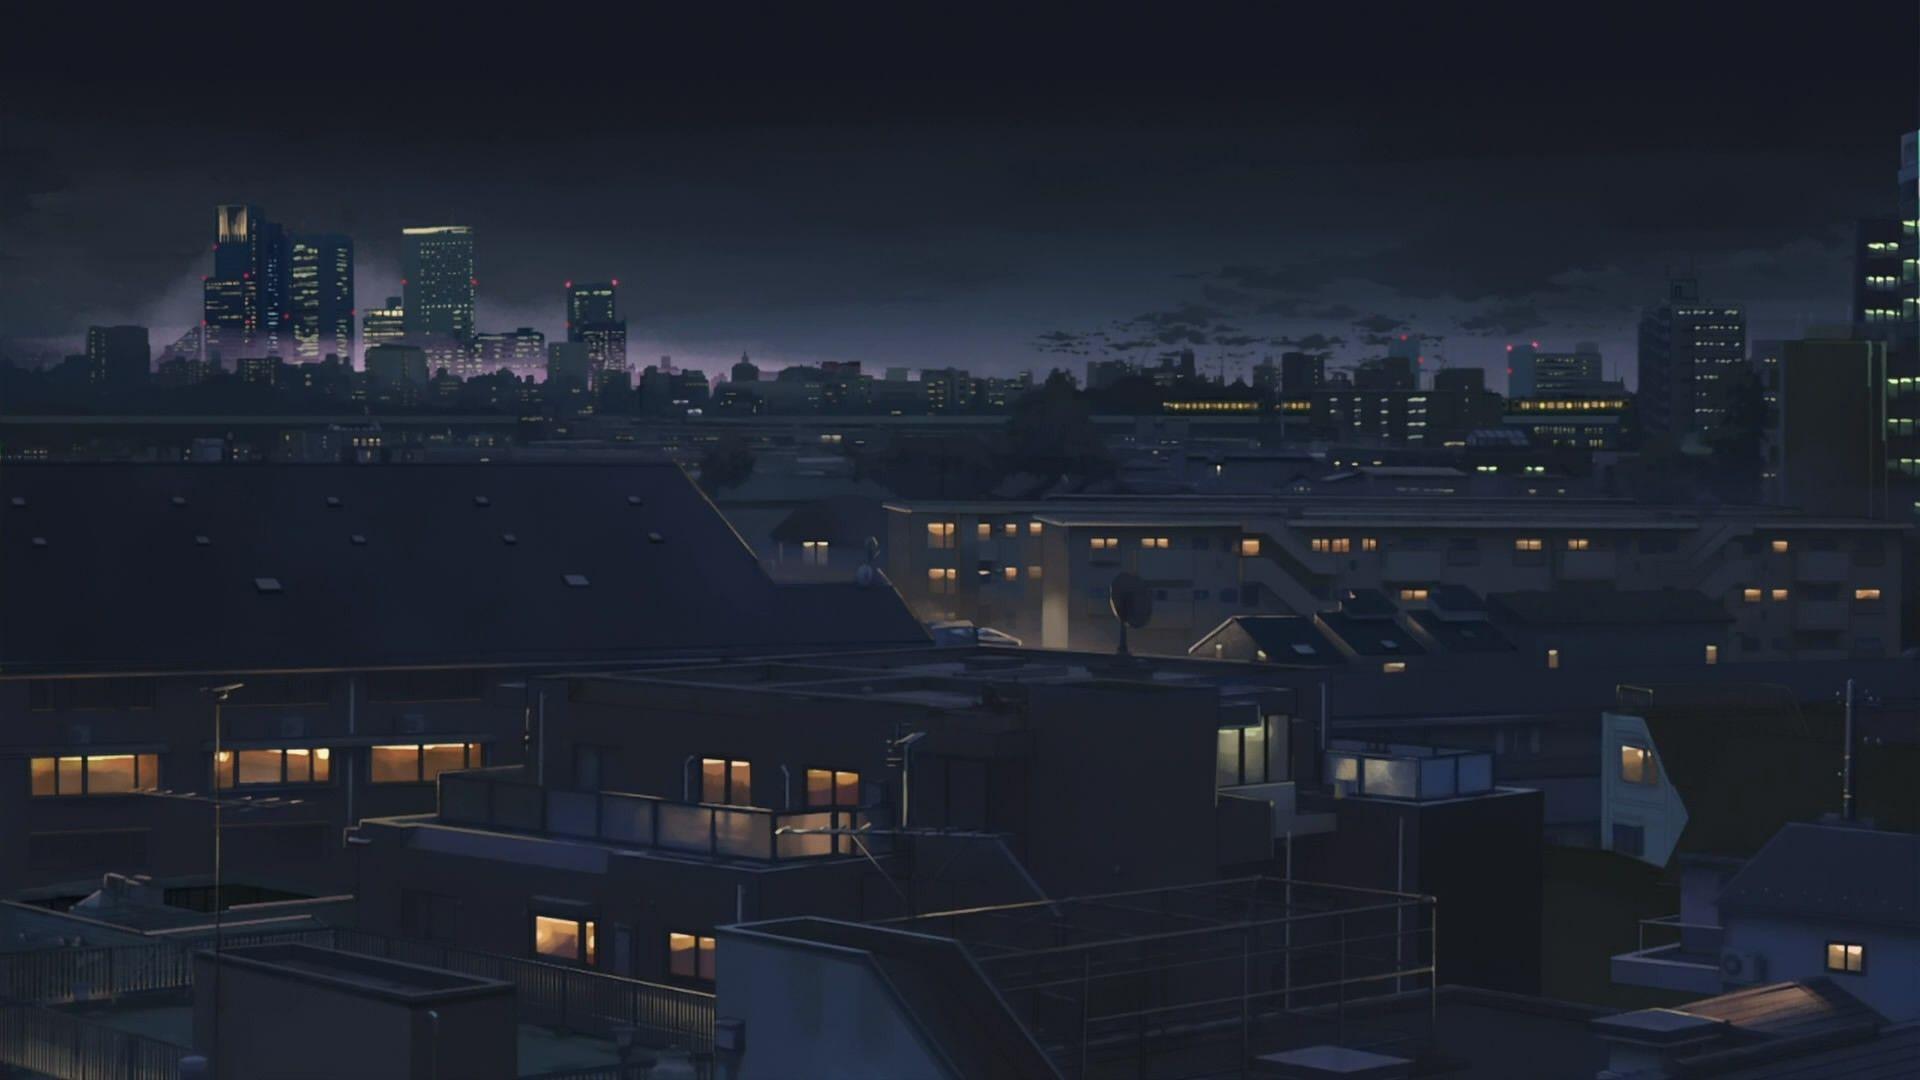 Anime City Night Images Browse 3571 Stock Photos  Vectors Free Download  with Trial  Shutterstock